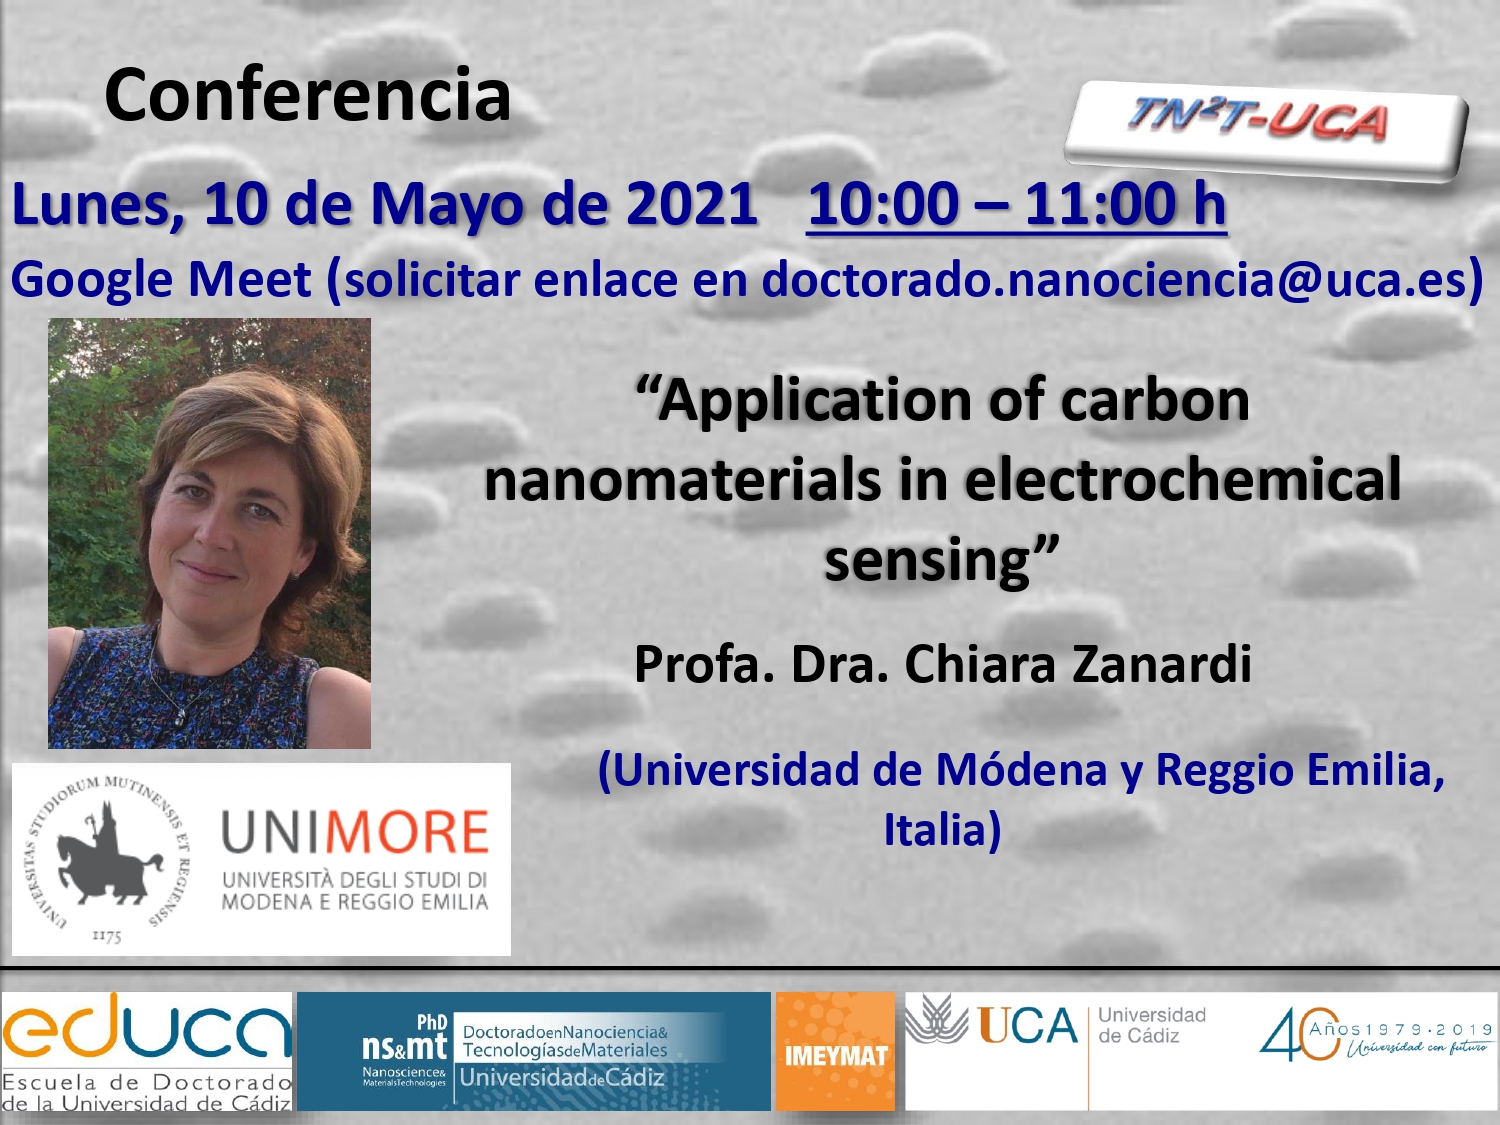 Conference “Application of carbon nanomaterials in electrochemical sensing” – 10/05